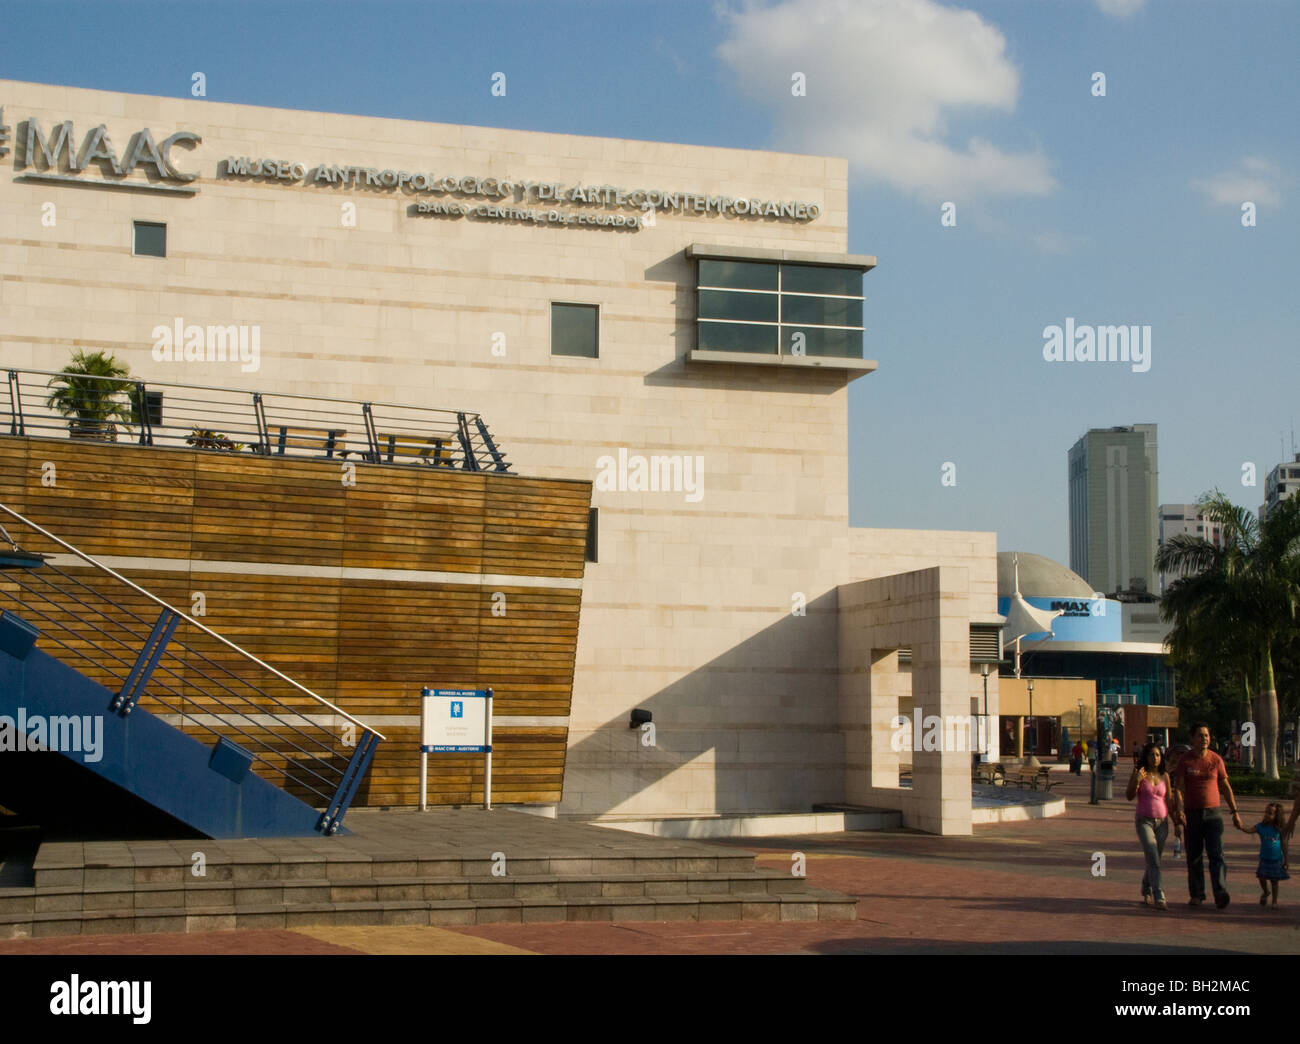 Ecuador. Guayaquil city. MAAC (Museum of anthropology  and contemporary art). Stock Photo